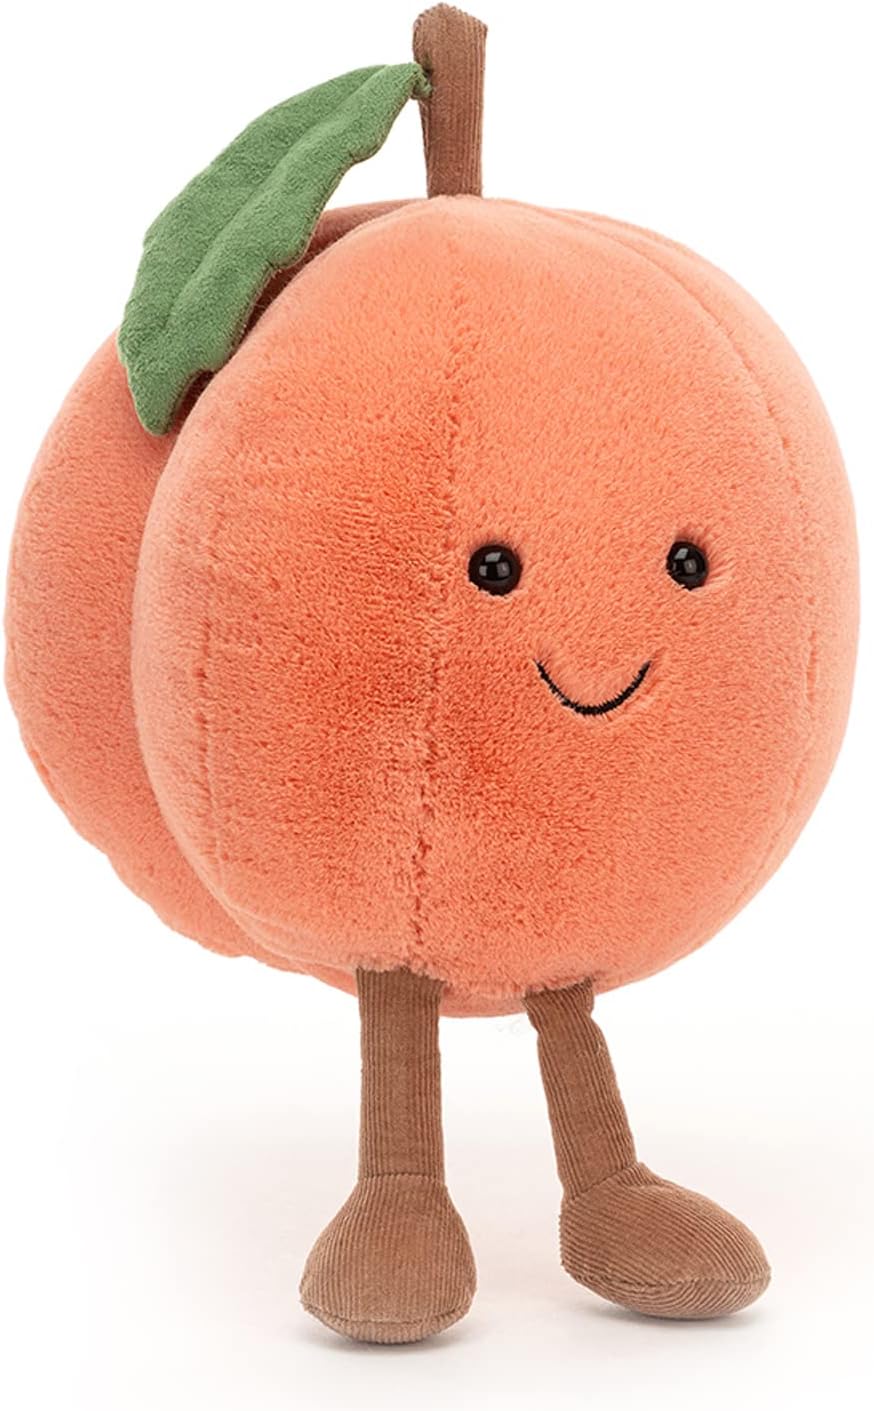 Amuseable Peach Plush Toy arranged as if standing up.